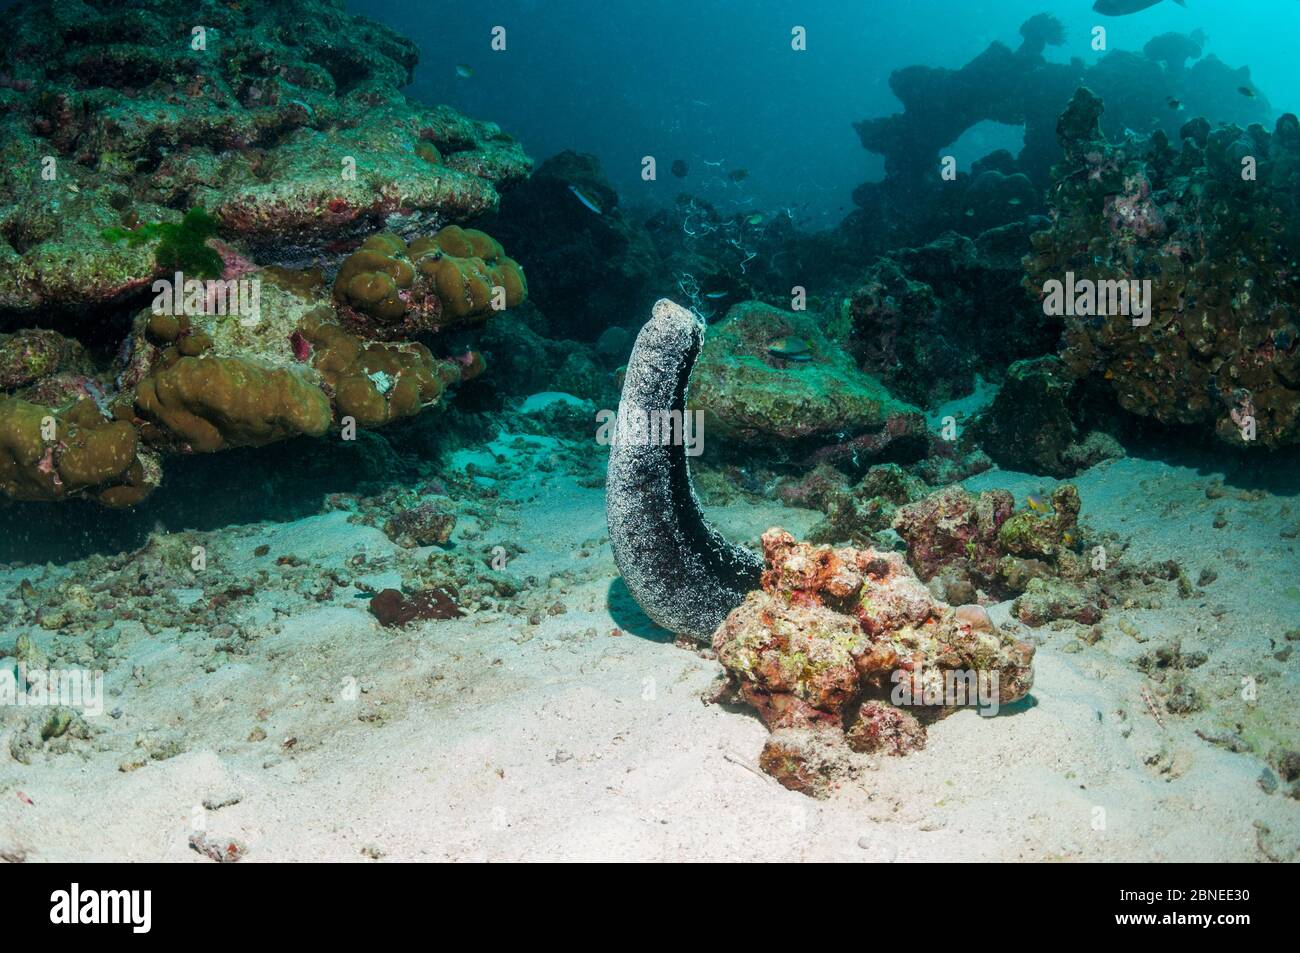 Black sea cucumber (Holothuria atra) rearing up and releasing eggs and sperm. Andaman Sea, Thailand. Stock Photo